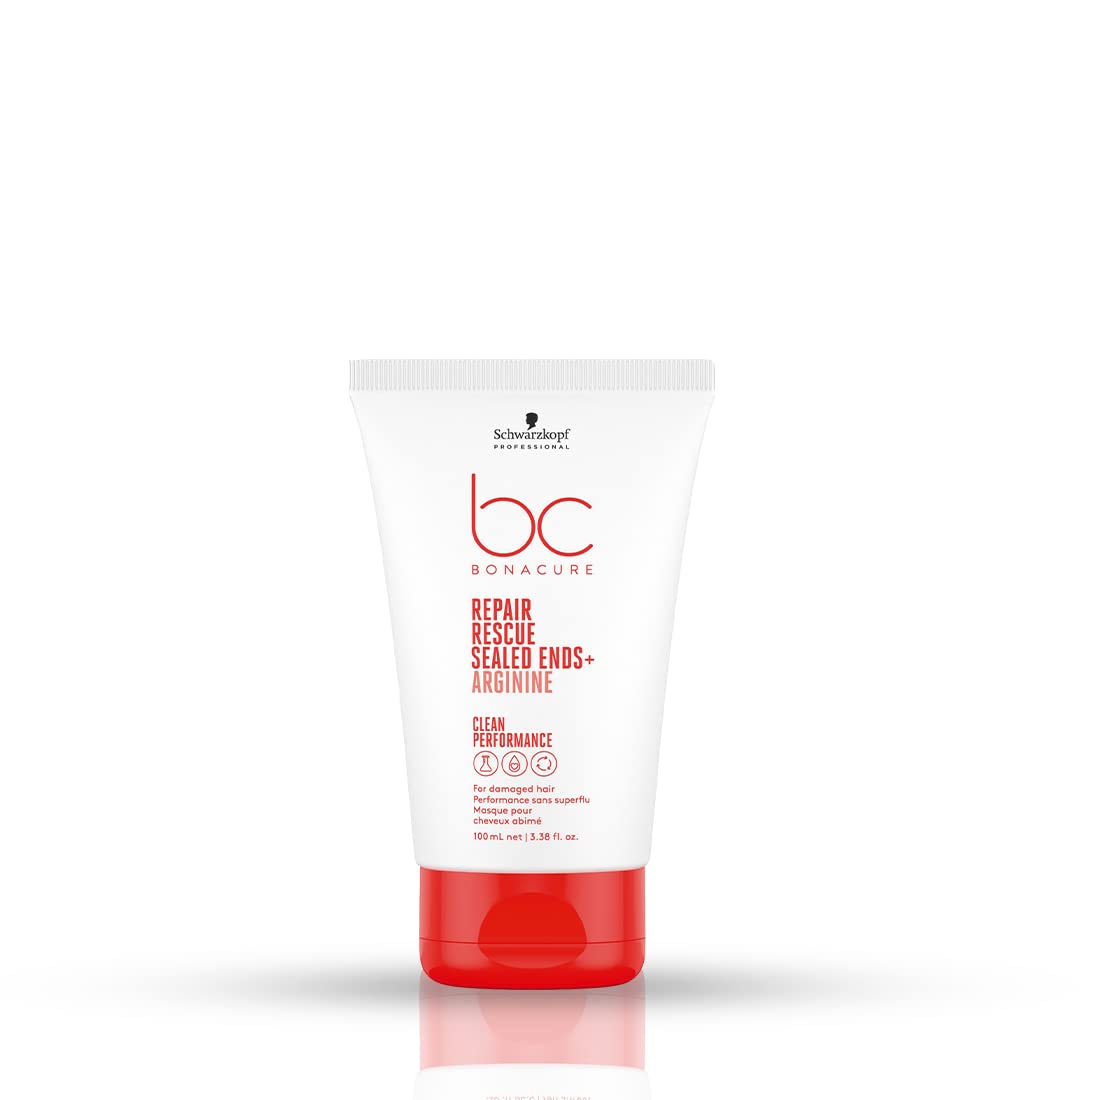 Schwarzkopf BC BONACURE Peptide Repair Rescue Sealed Ends, 2.5-Ounce, Packaging May Vary